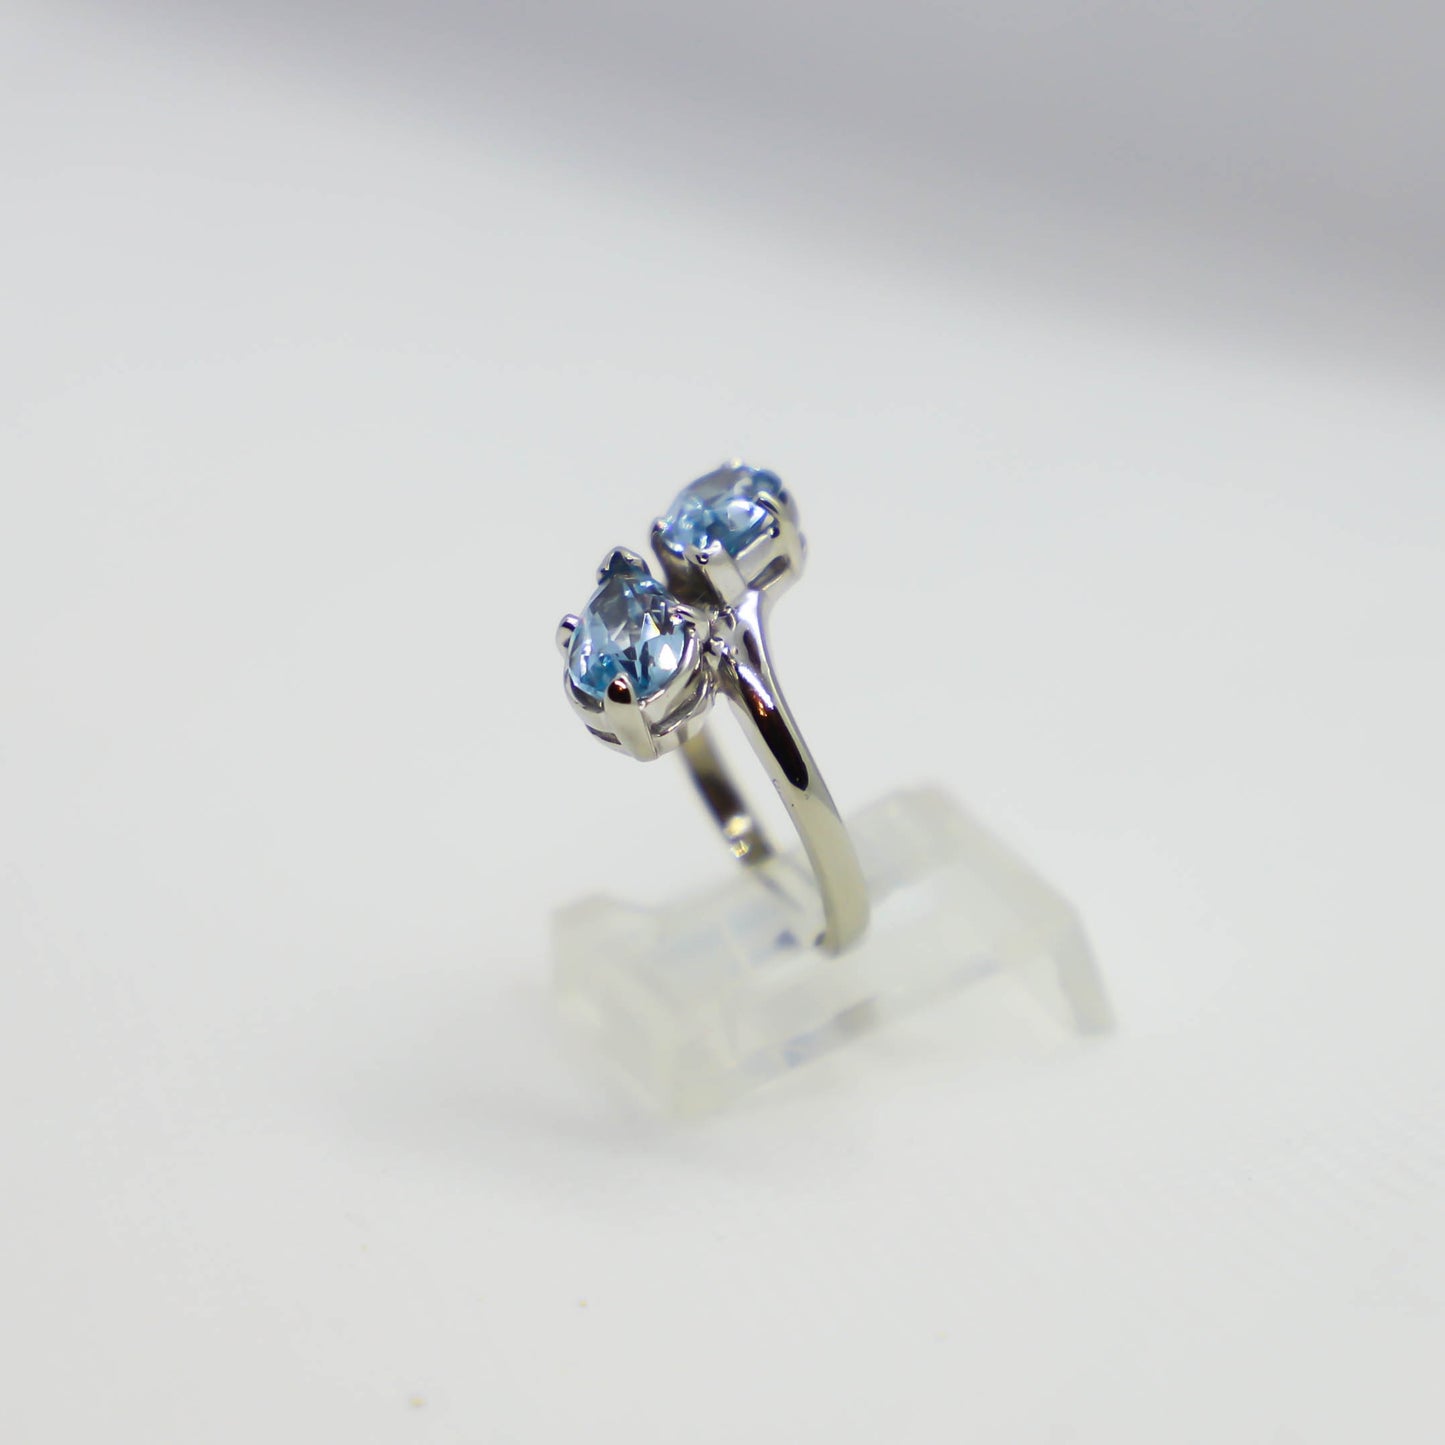 White gold, pear shaped blue topaz ring